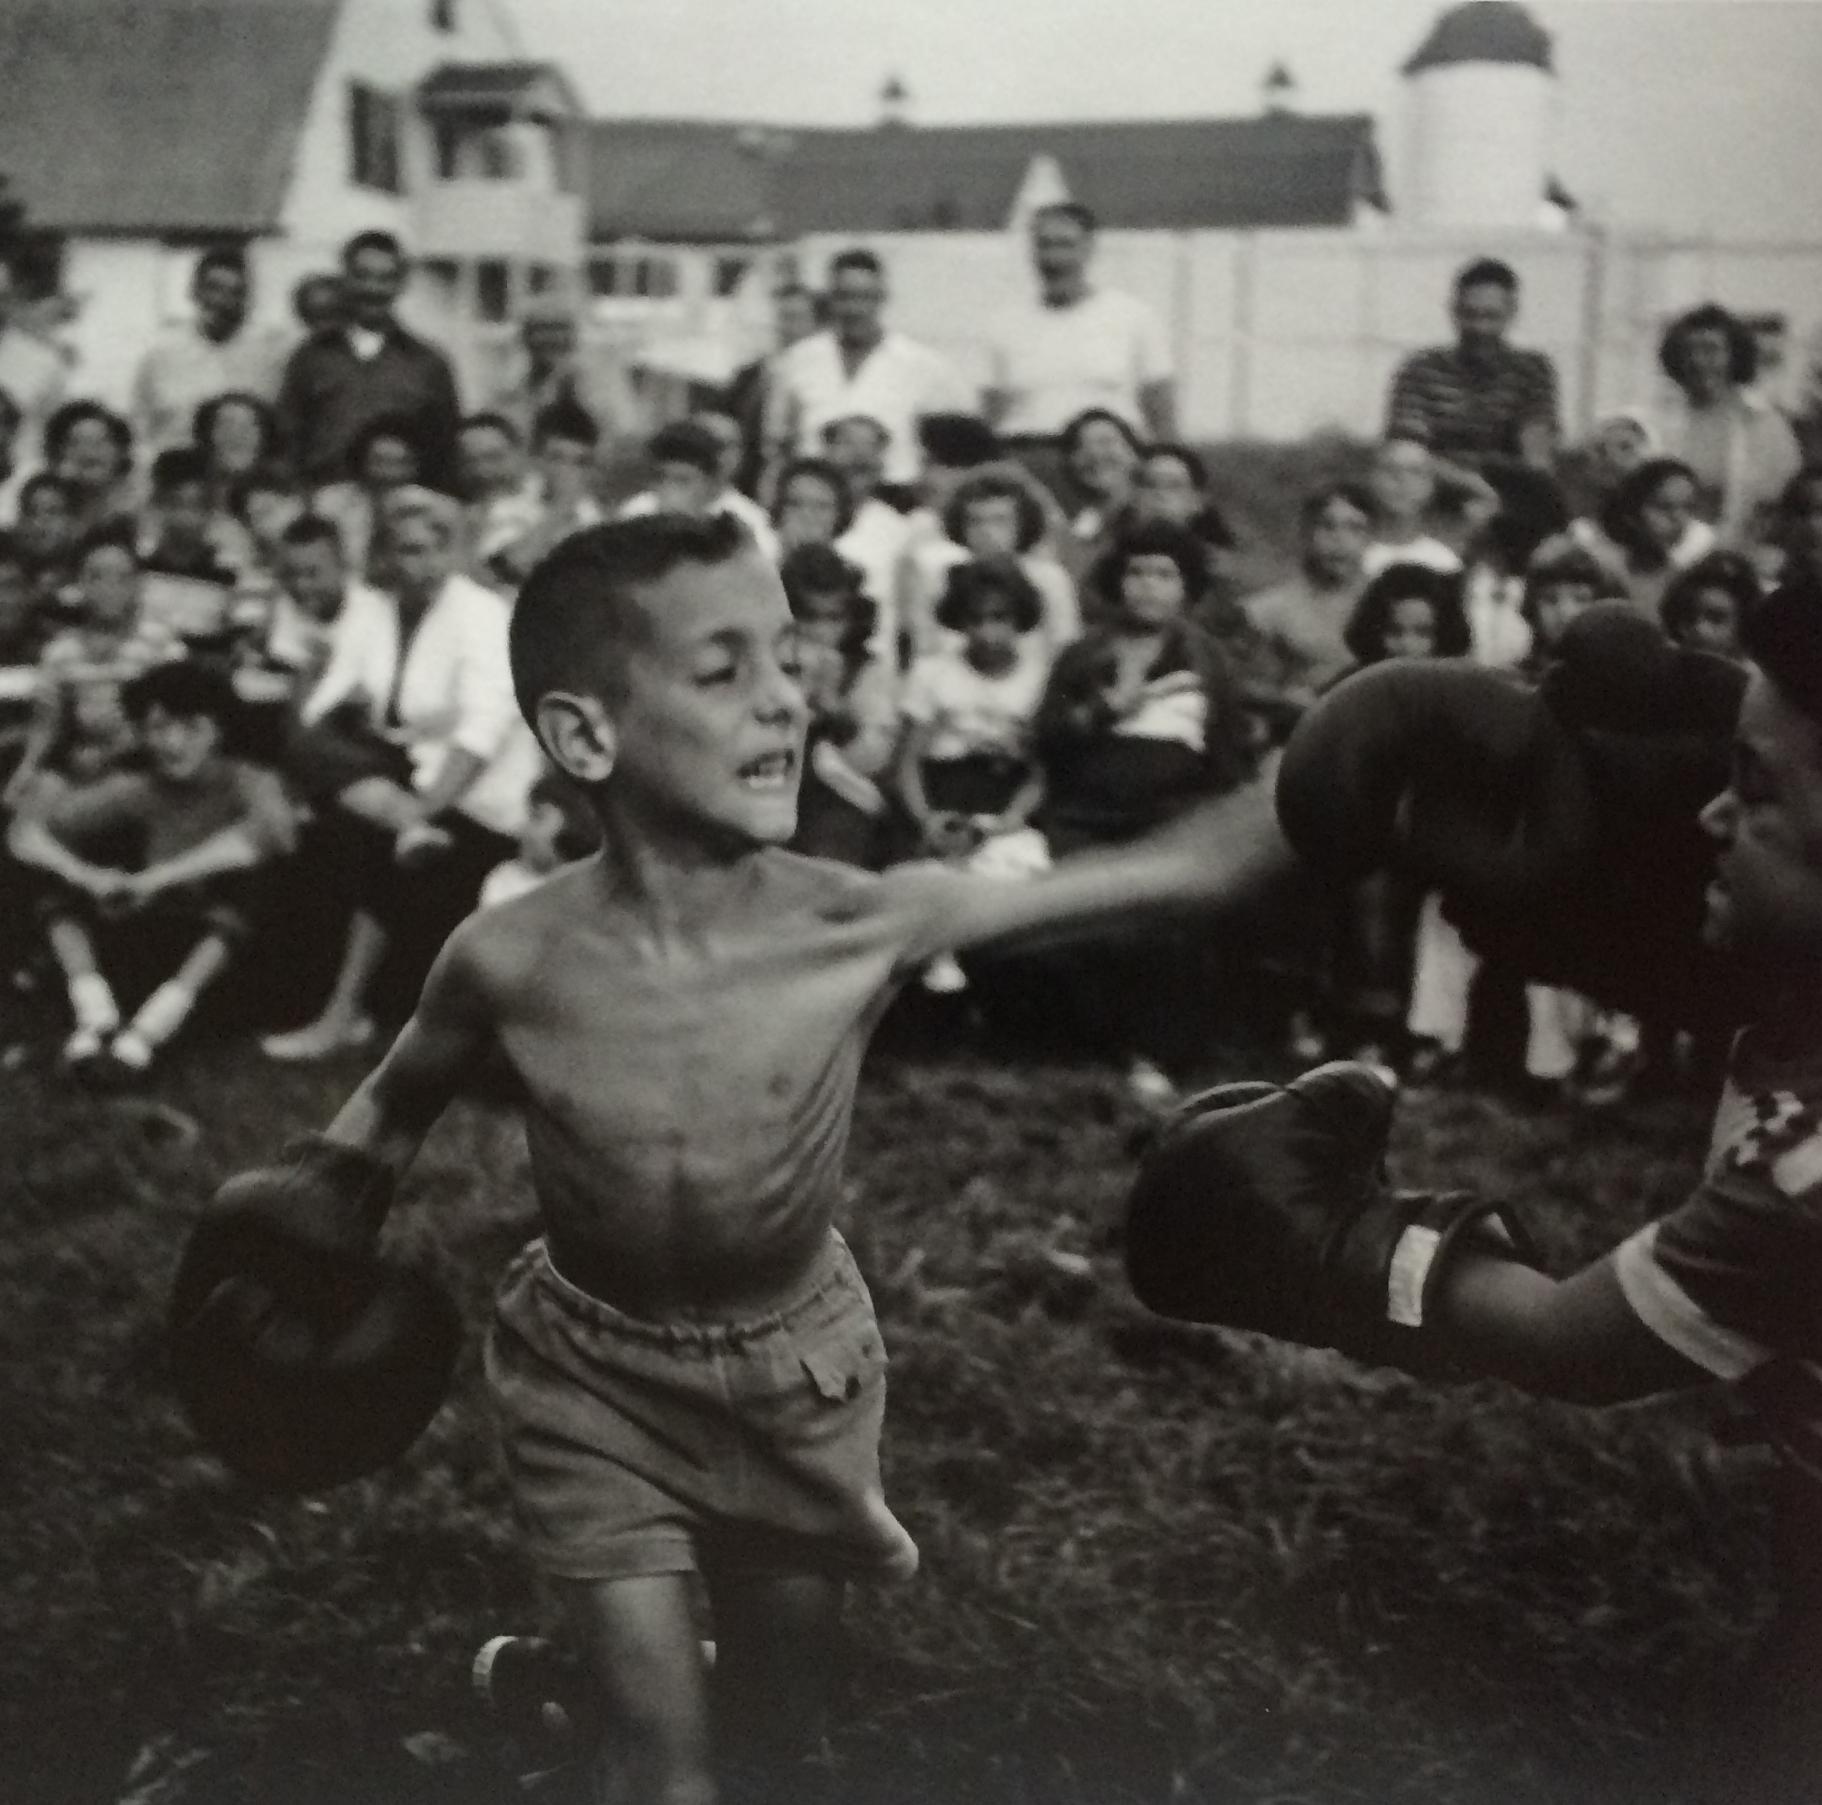 Kid Boxing, 1952, Black and White Photograph by Art Shay, Signed and Framed